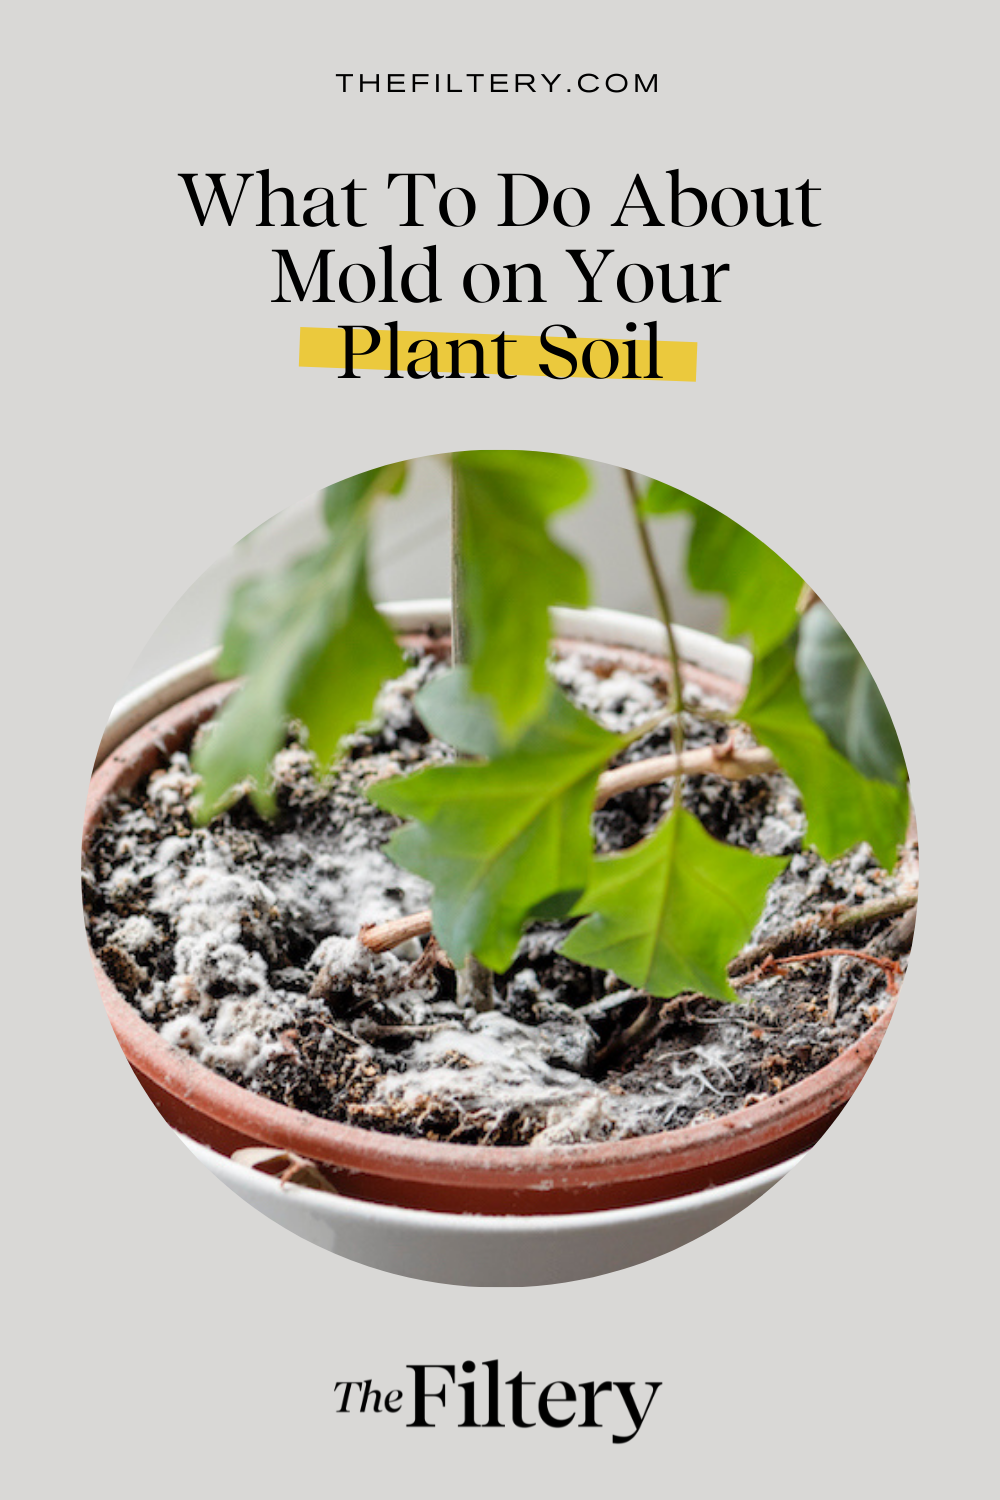 How to Prevent &  Get Rid of Mold on Plant Soil